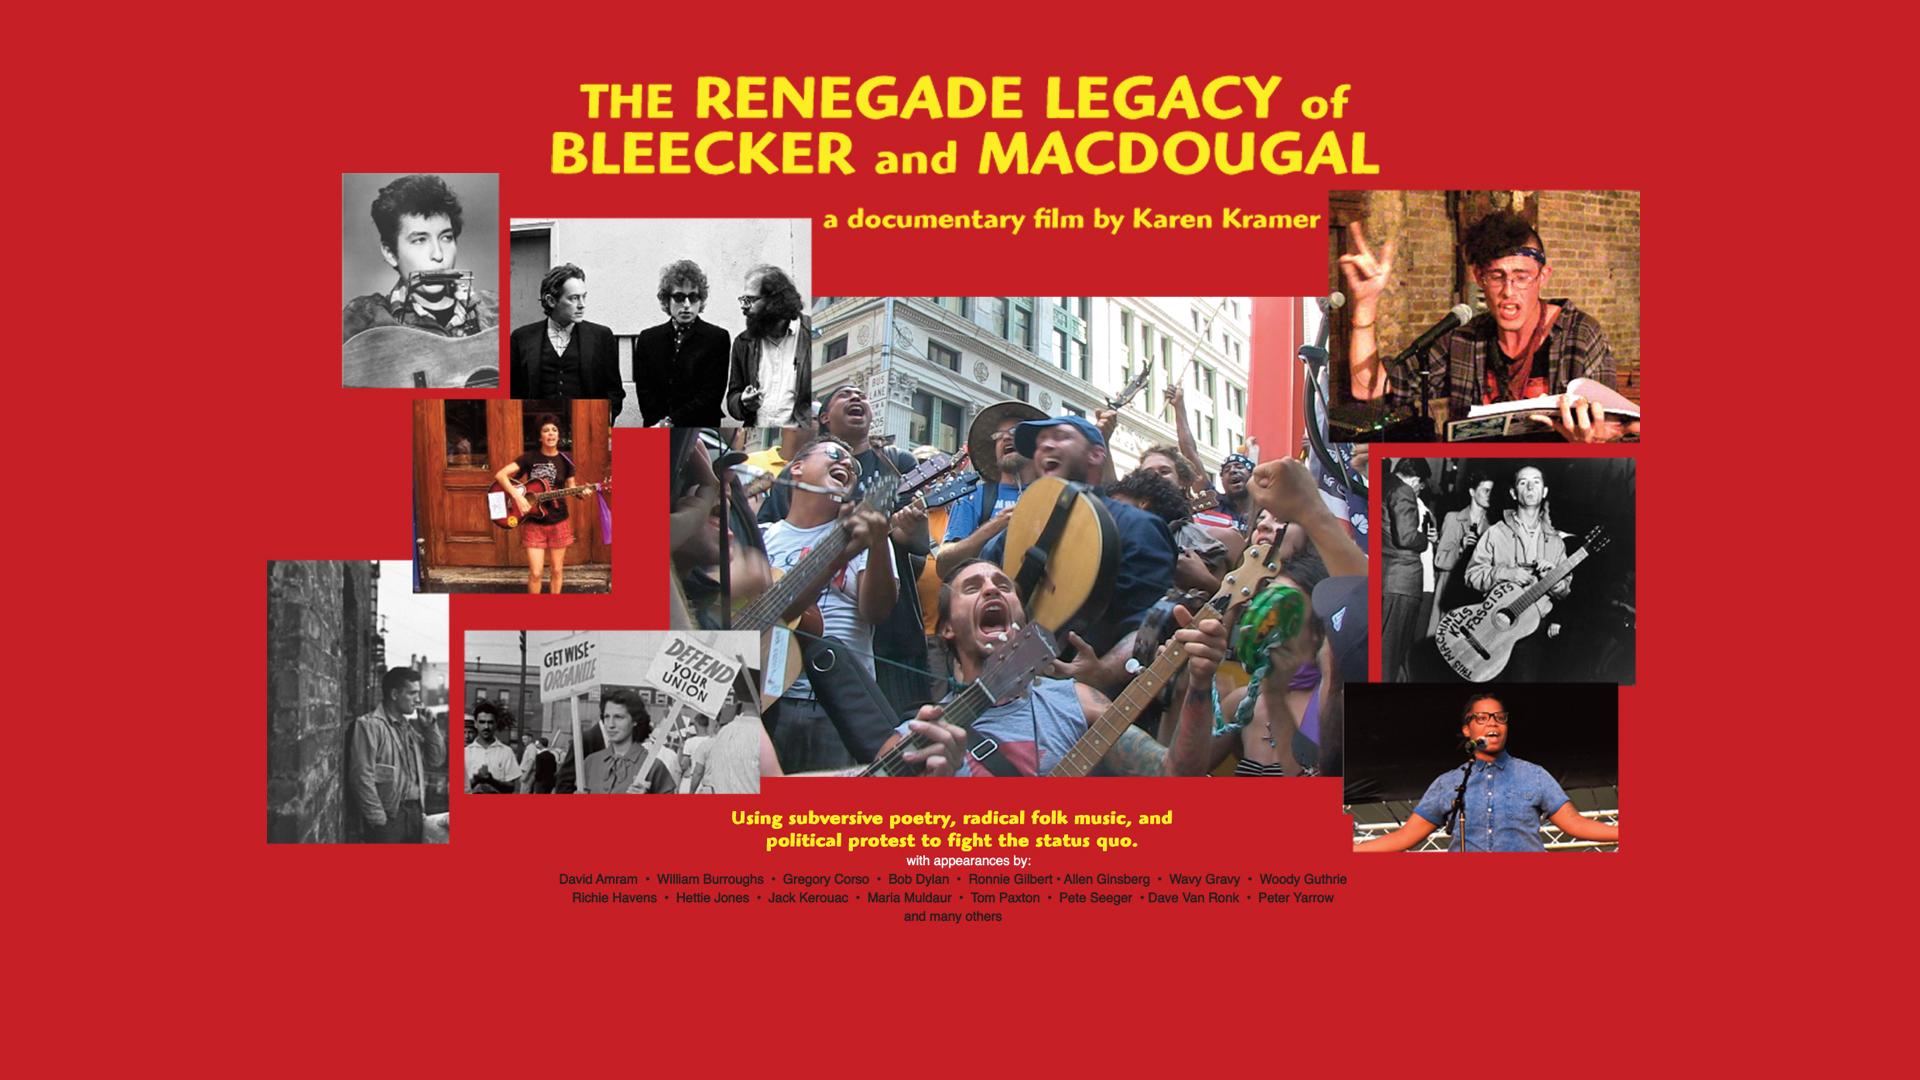 The Renegade Legacy of Bleecker and MacDougal